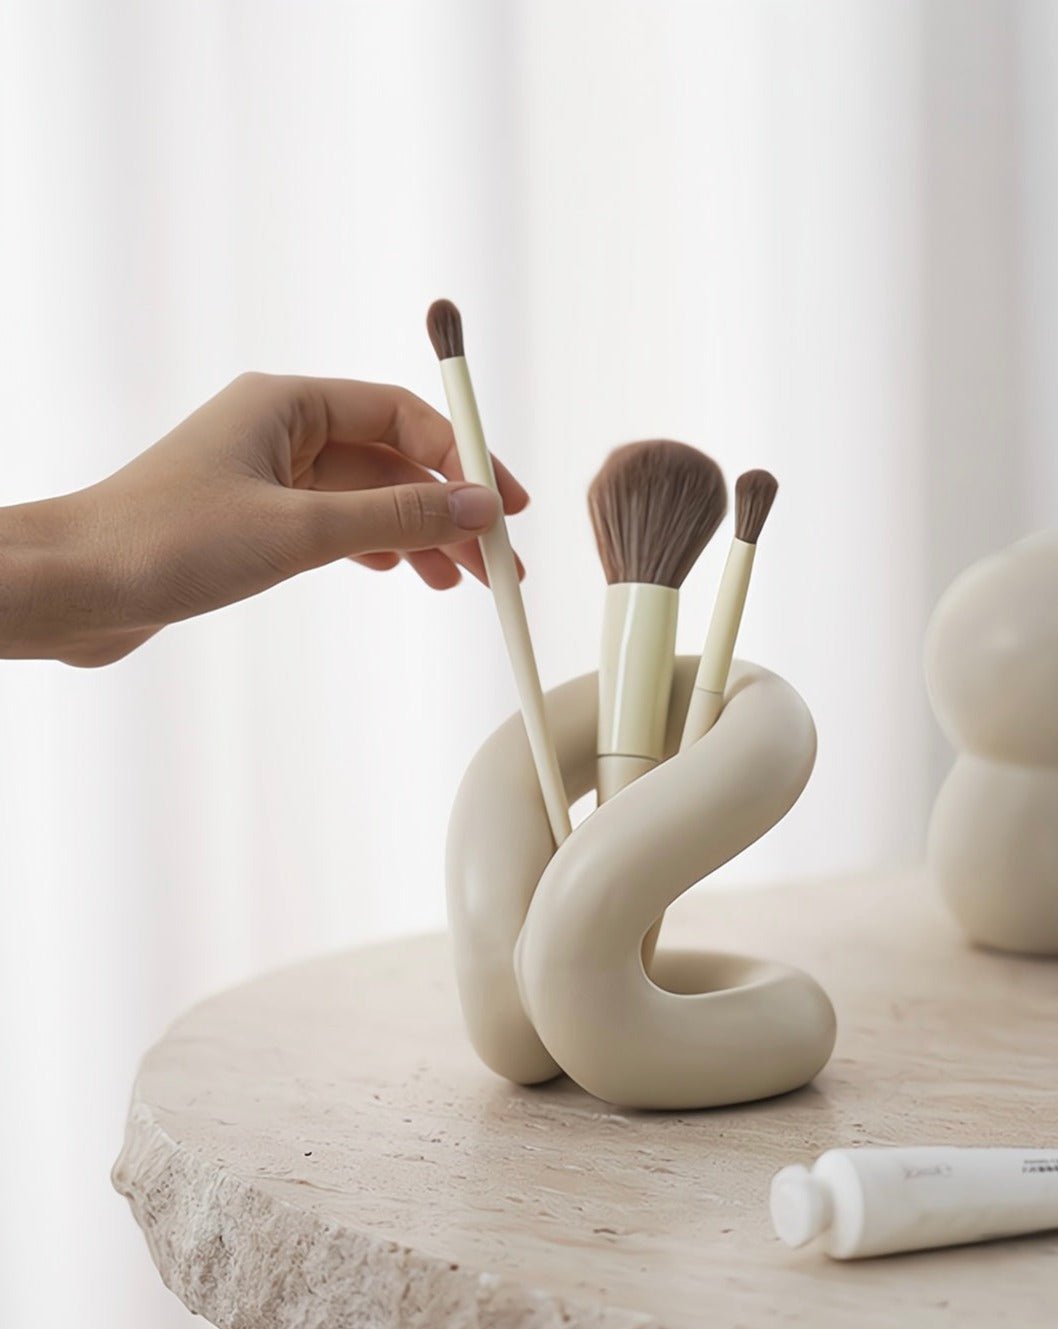 Nordic Style Ceramic Foundation Brushes Holders - Nordic Style Ceramic Foundation Brushes Holders-Cheese - INSPECIAL HOME